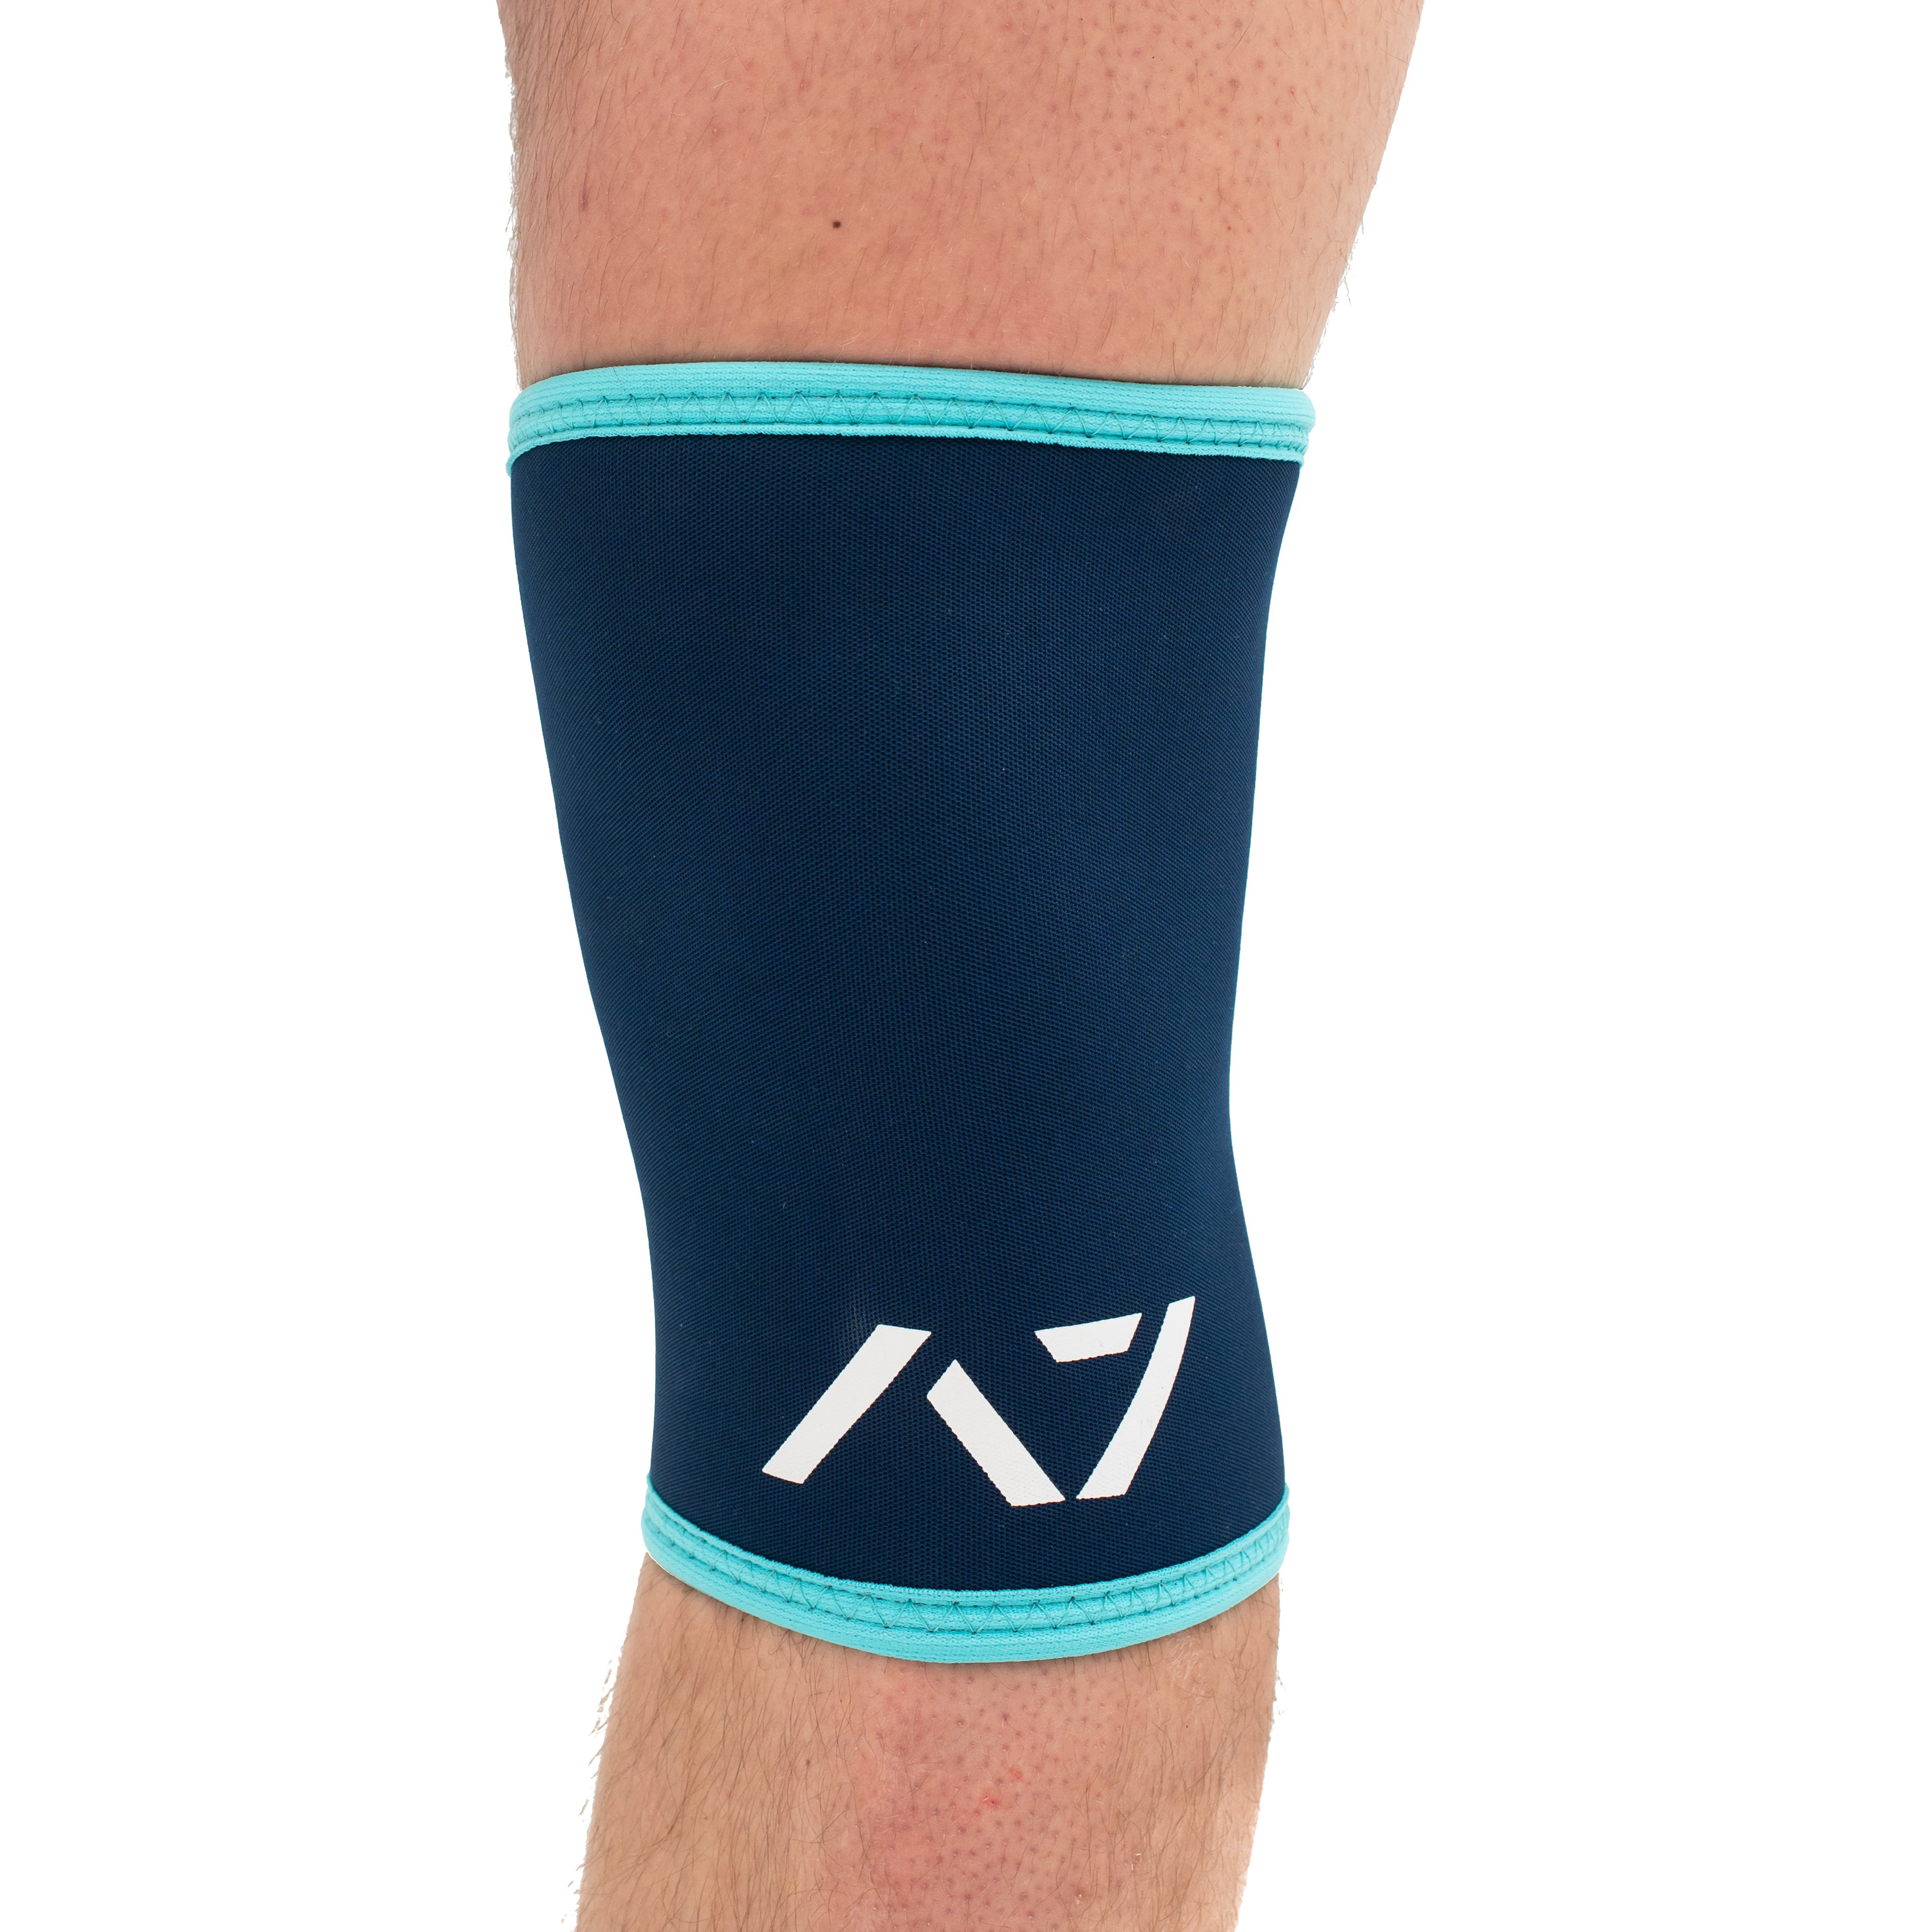 The IPF Approved A7 Iced Stiff knee sleeves are structured with a downward cut panel on the back of the quad and calf to ensure these have the ultimate compression at the knee joint. The A7 CONE Iced Stiff Knee Sleeves are IPF approved and are allowed in all IPF competitions and affiliate federations like the European Powerlifting Federation and all federations across Europe. A7 Iced Stiff Sleeves knee sleeves are IPF Approved Kit. A7 UK shipping to UK and Europe.